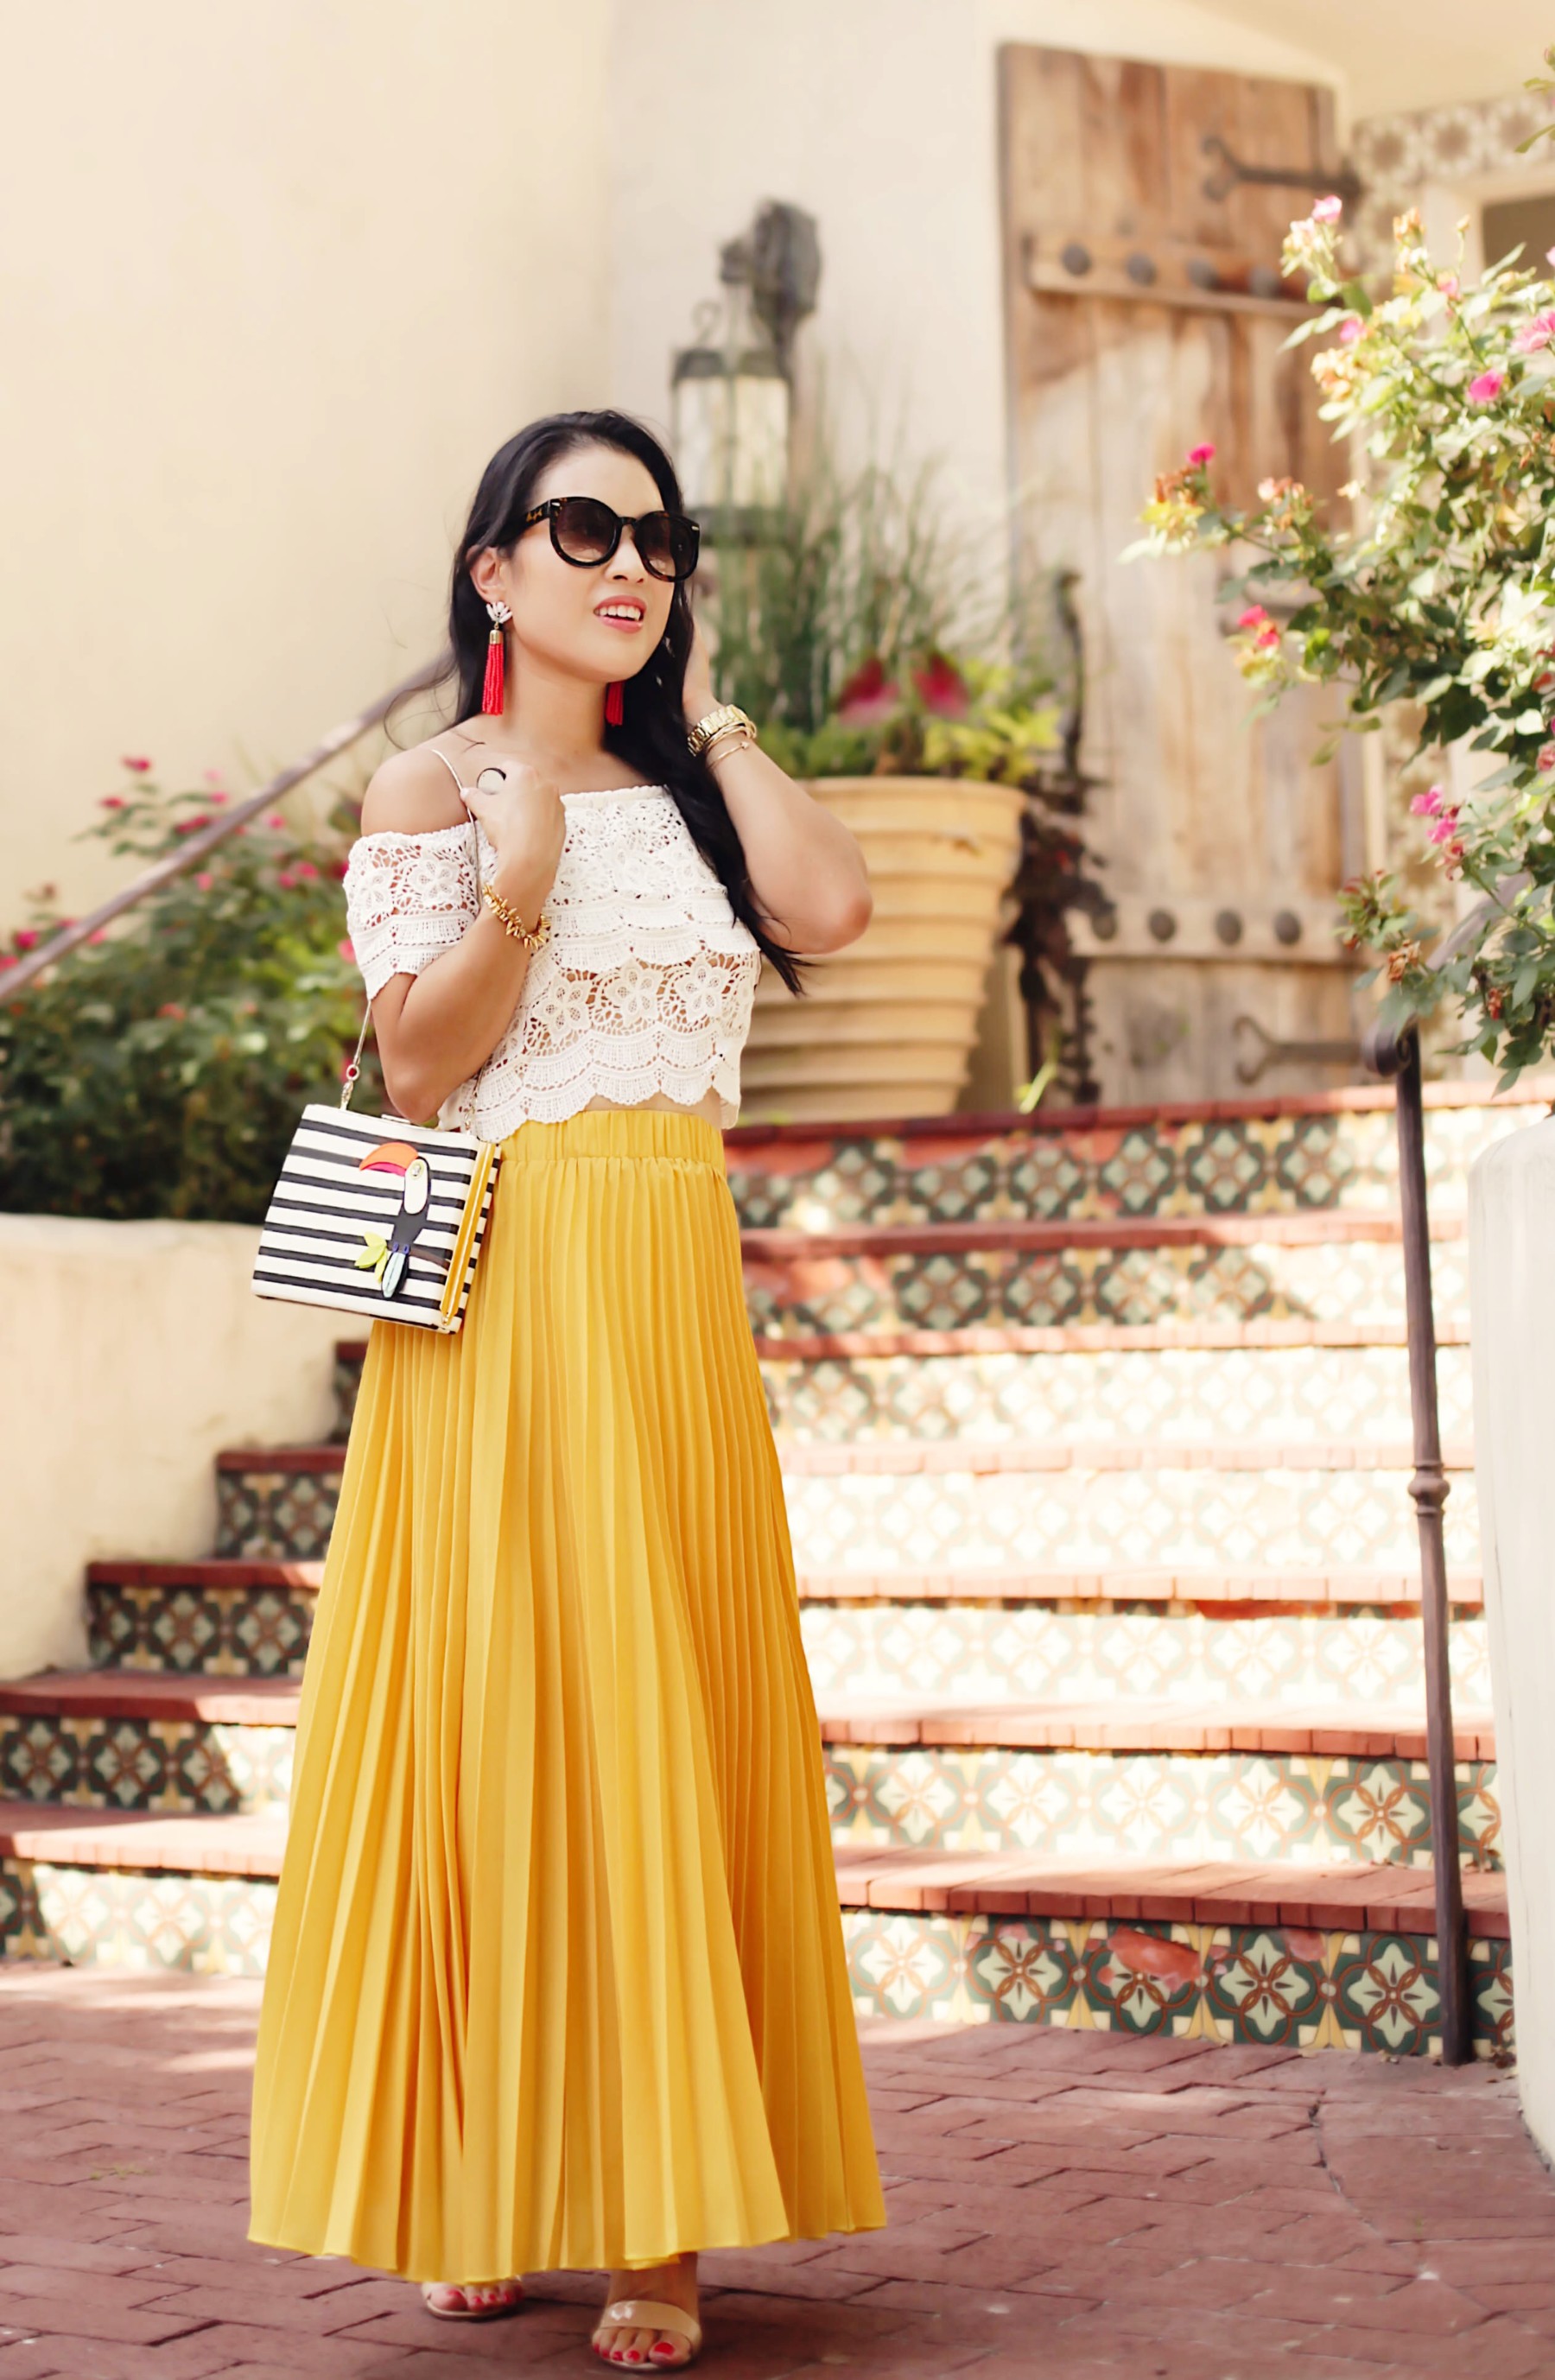 petite fashion blog | lace off shoulder crop top, yellow pleated maxi skirt, kate spade toucan clutch | summer outfit